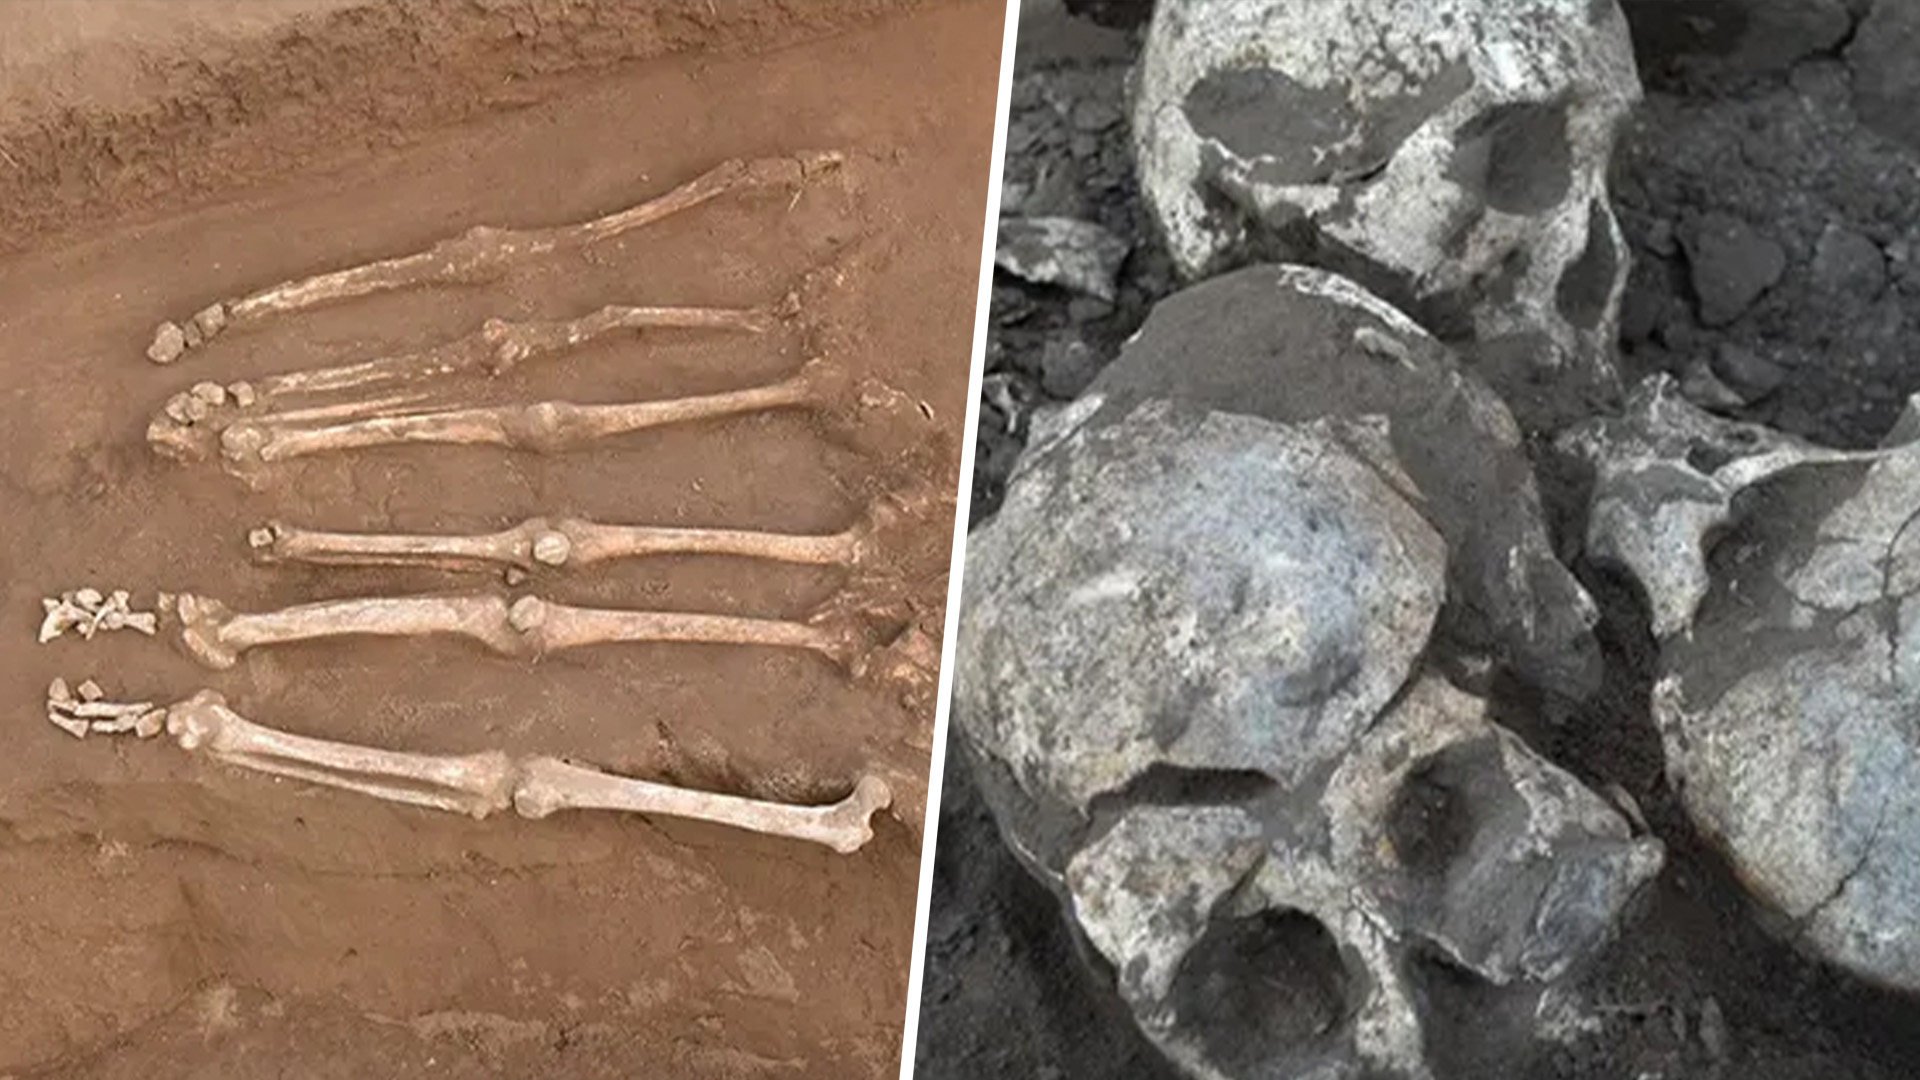 A 4,100-year-old mass grave uncovered in China has shed fresh light on what experts believe was the biggest headhunting massacre of the country’s Neolithic period. Photo: SCMP composite/Qian Wang, Texas A&M University